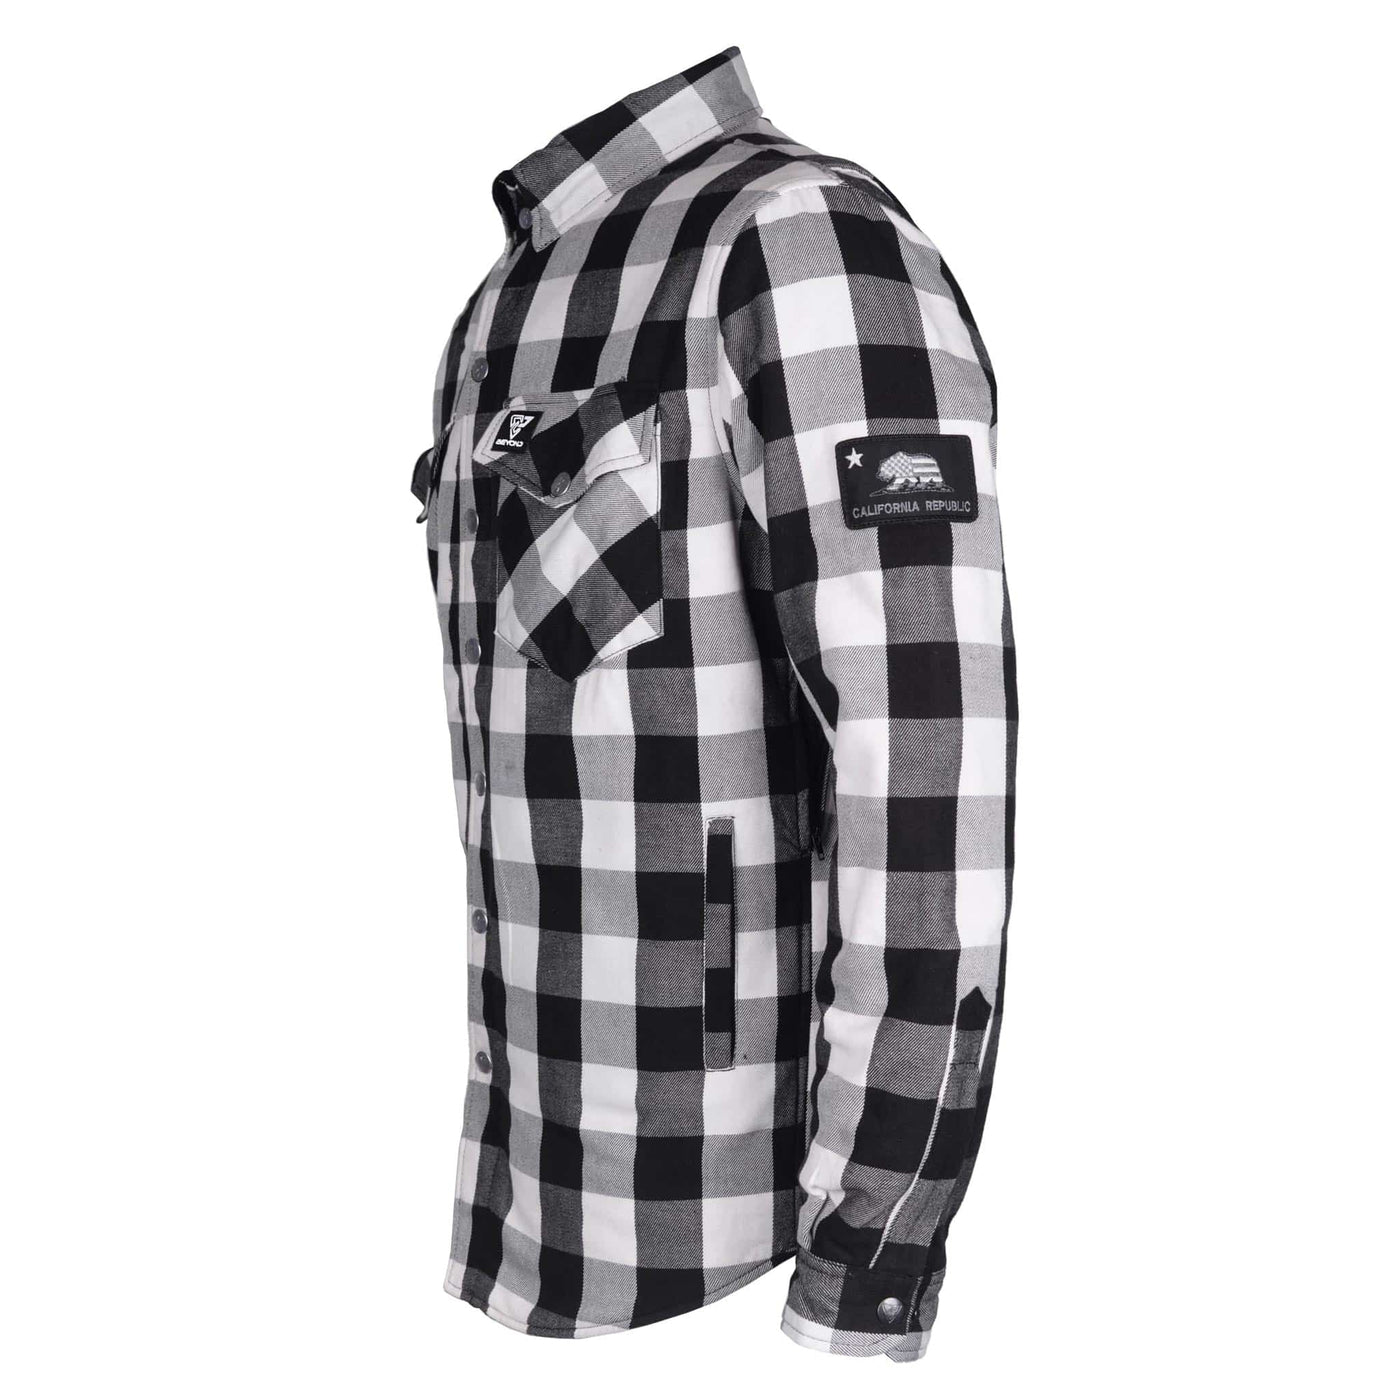 Protective Flannel Shirt with Pads "Midnight Ride" - Black and White Checkered